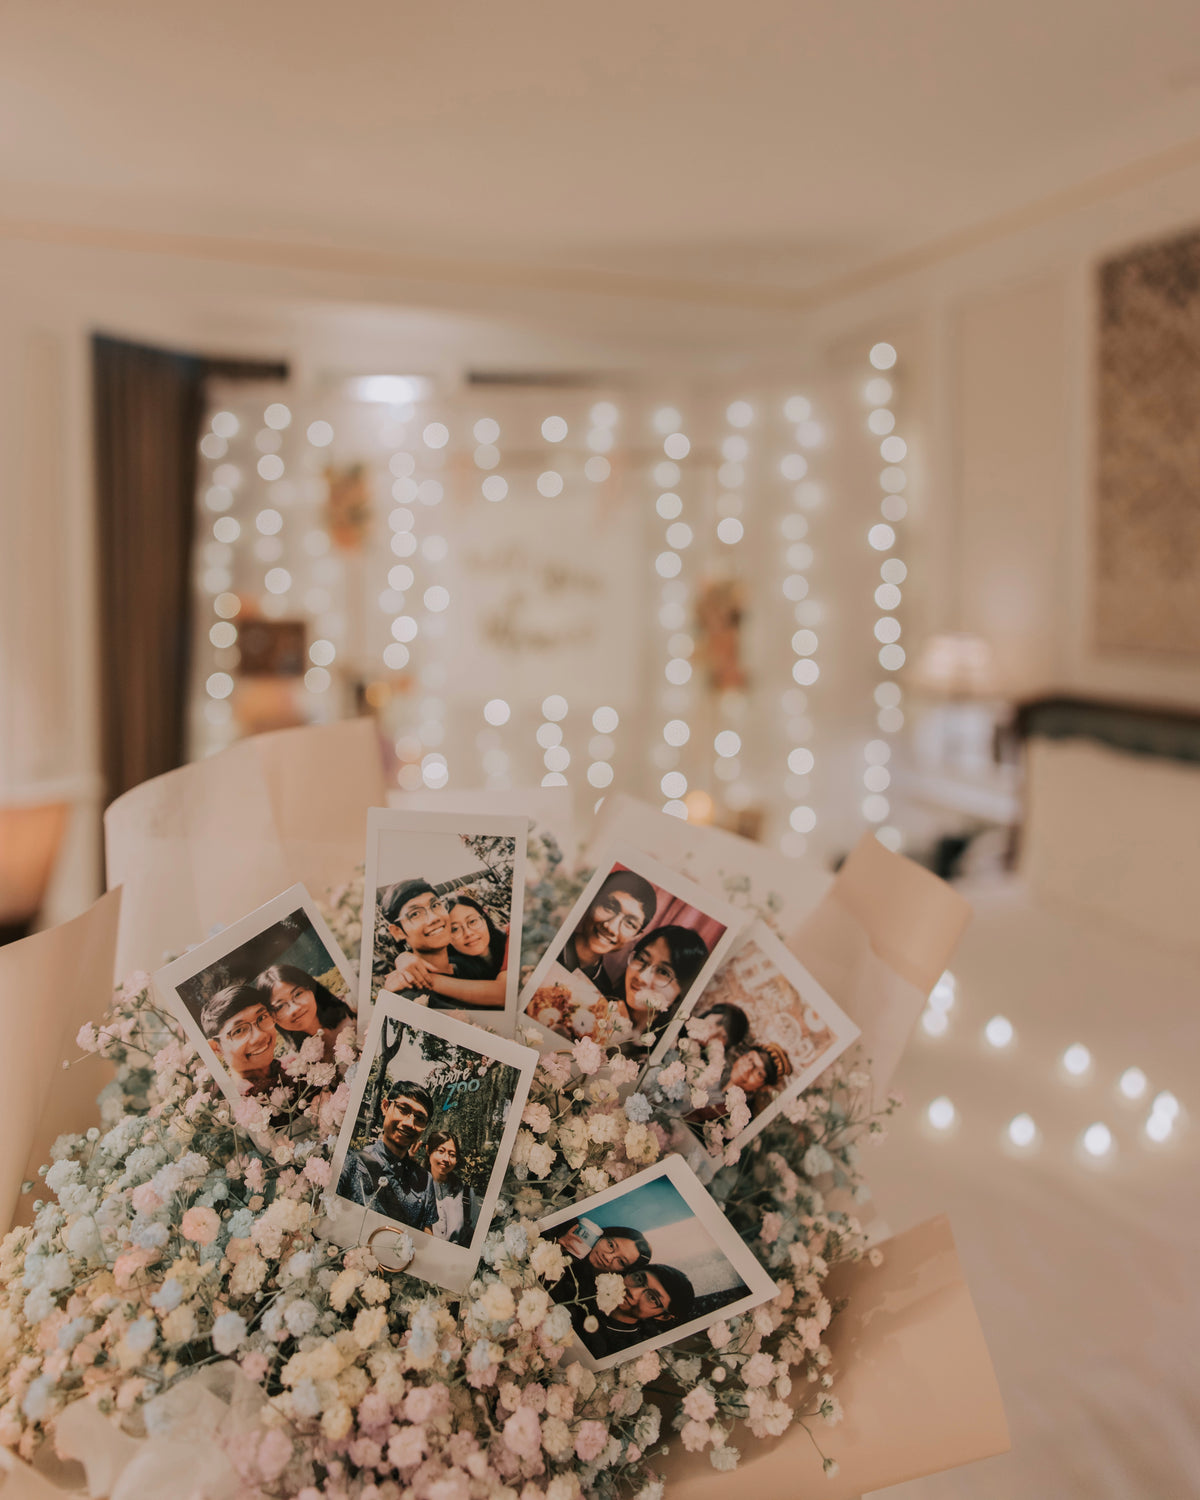 Romantic Hotel Room Proposal Decor in Intercontinental Singapore with Fairylight Backdrop, Pastel Balloons and Flowers by Style It Simply